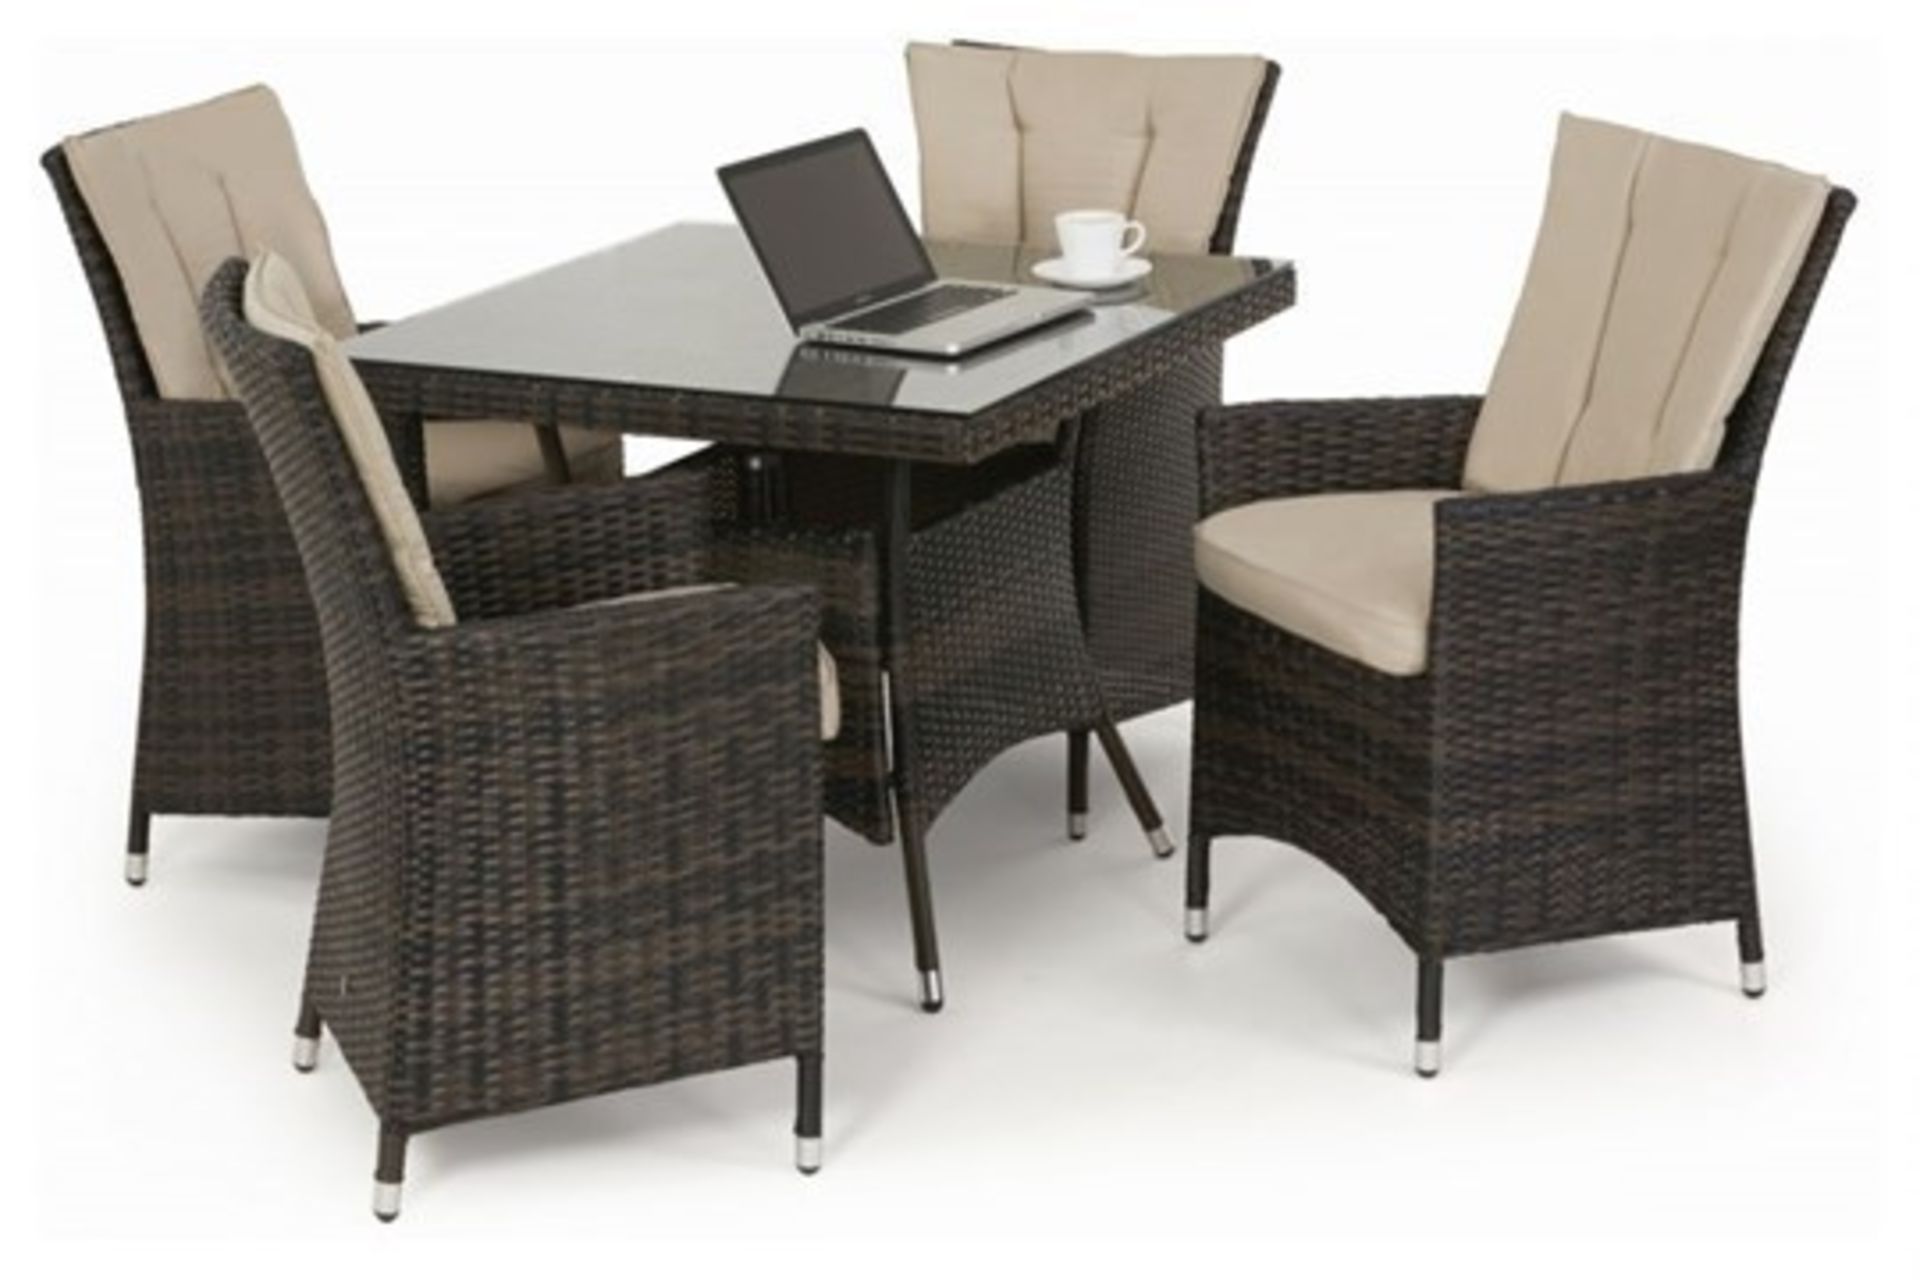 Rattan LA 4 Seat Square Outdoor Dining Set (Brown) *BRAND NEW*